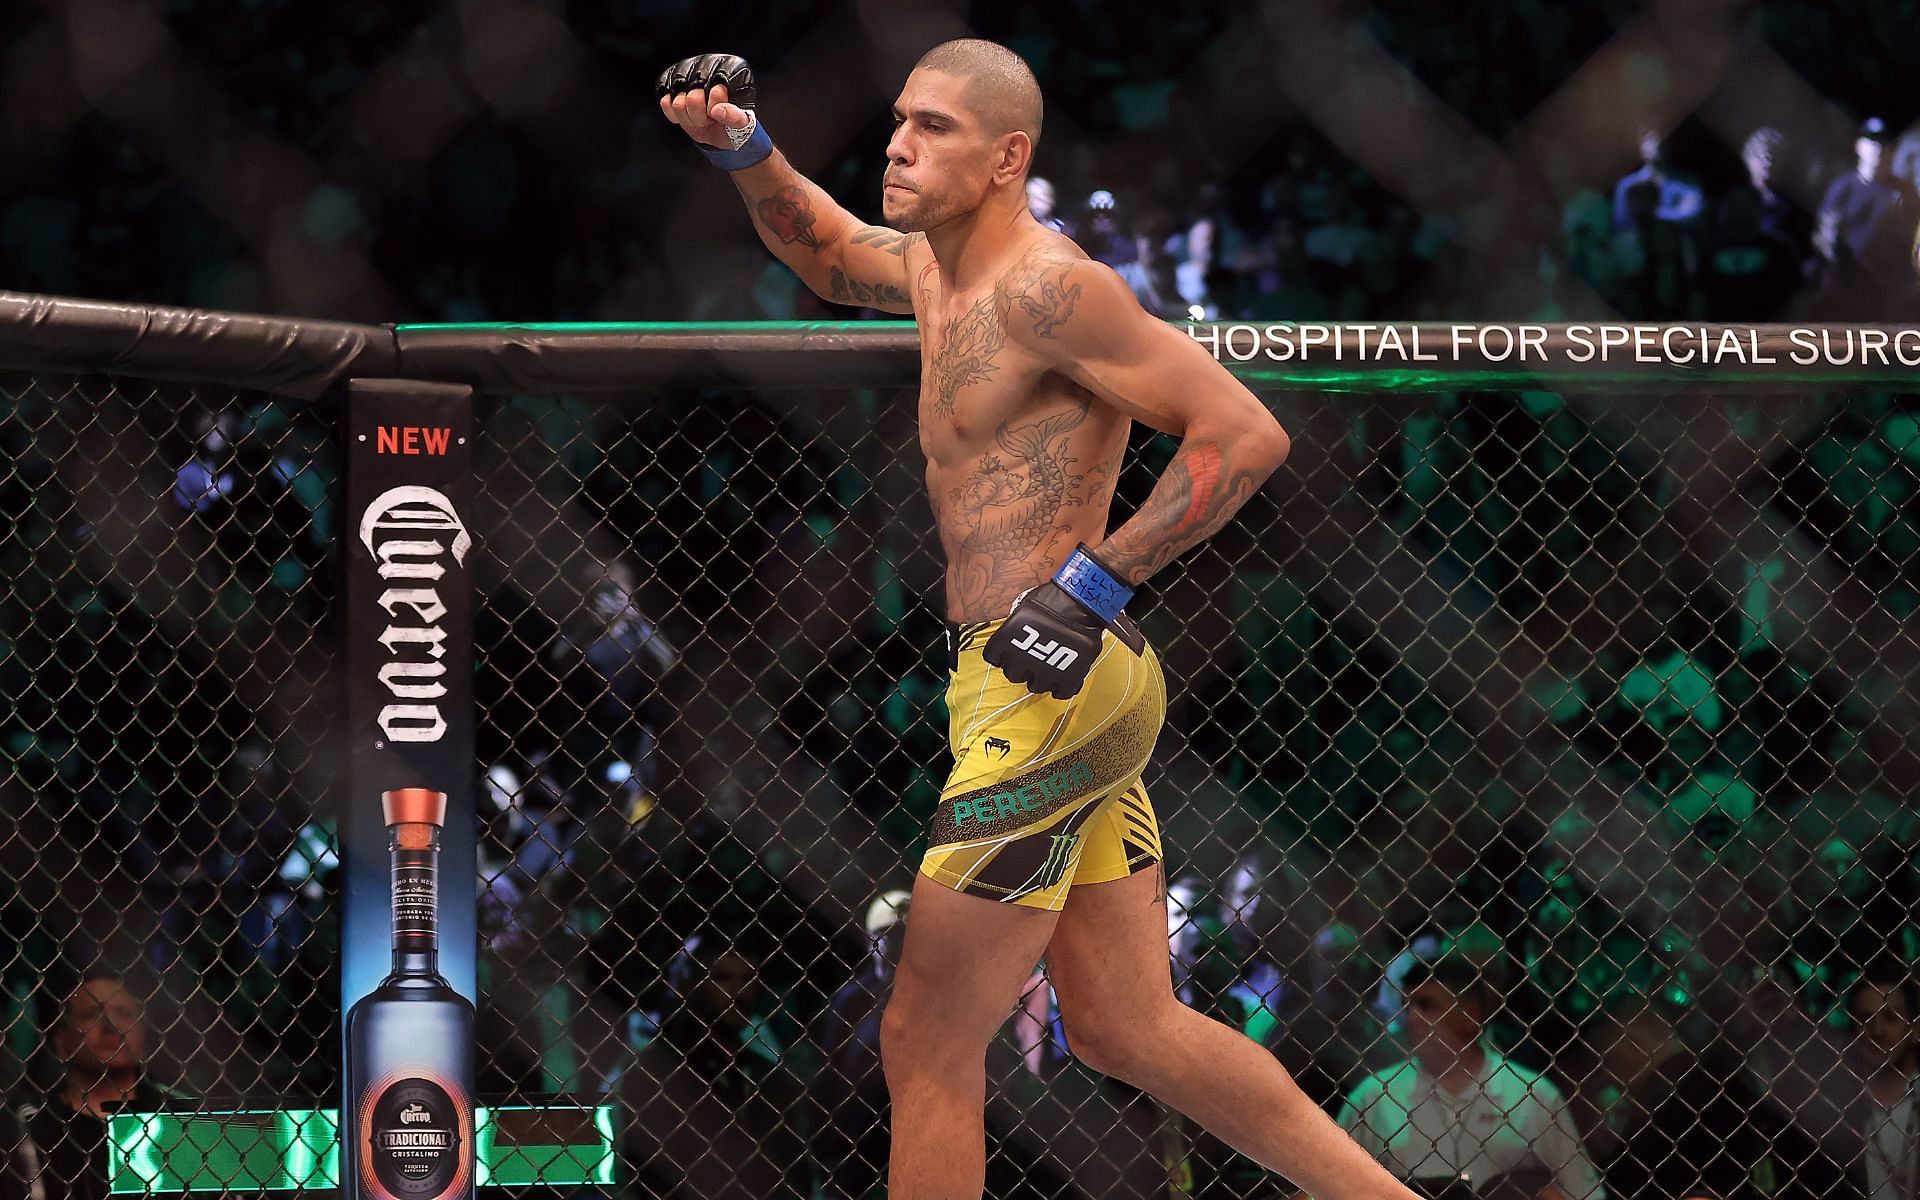 Alex Pereira is beheld as one of the most beloved and skilled fighters in the UFC today [Image courtesy: Getty Images]